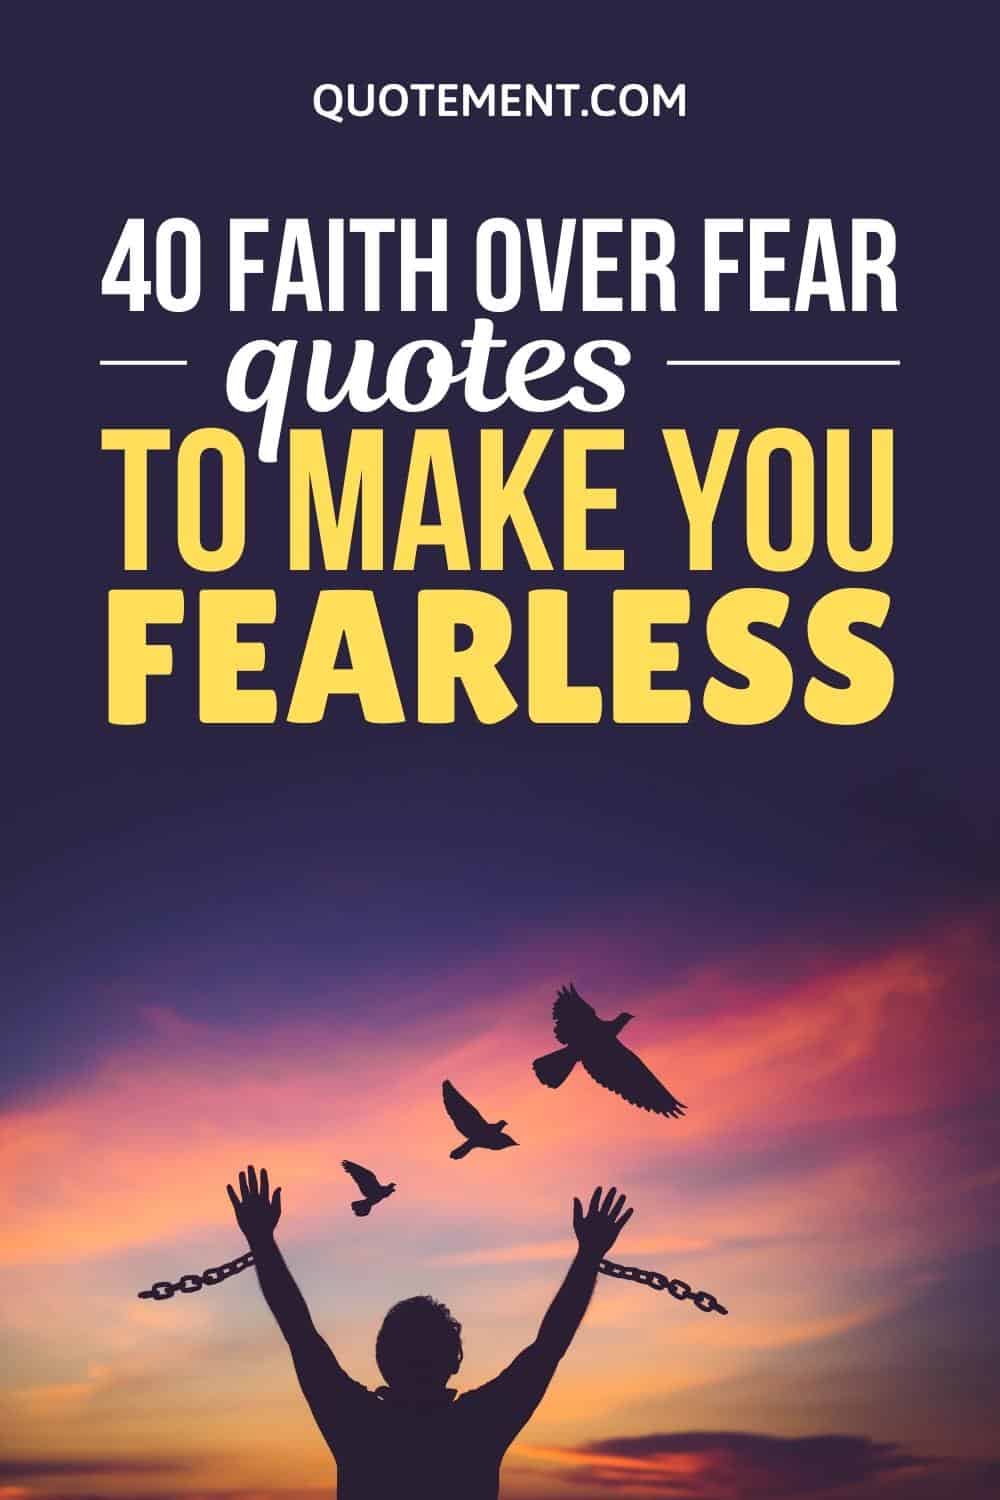 40 Inspiring Faith Over Fear Quotes To Make You Fearless
